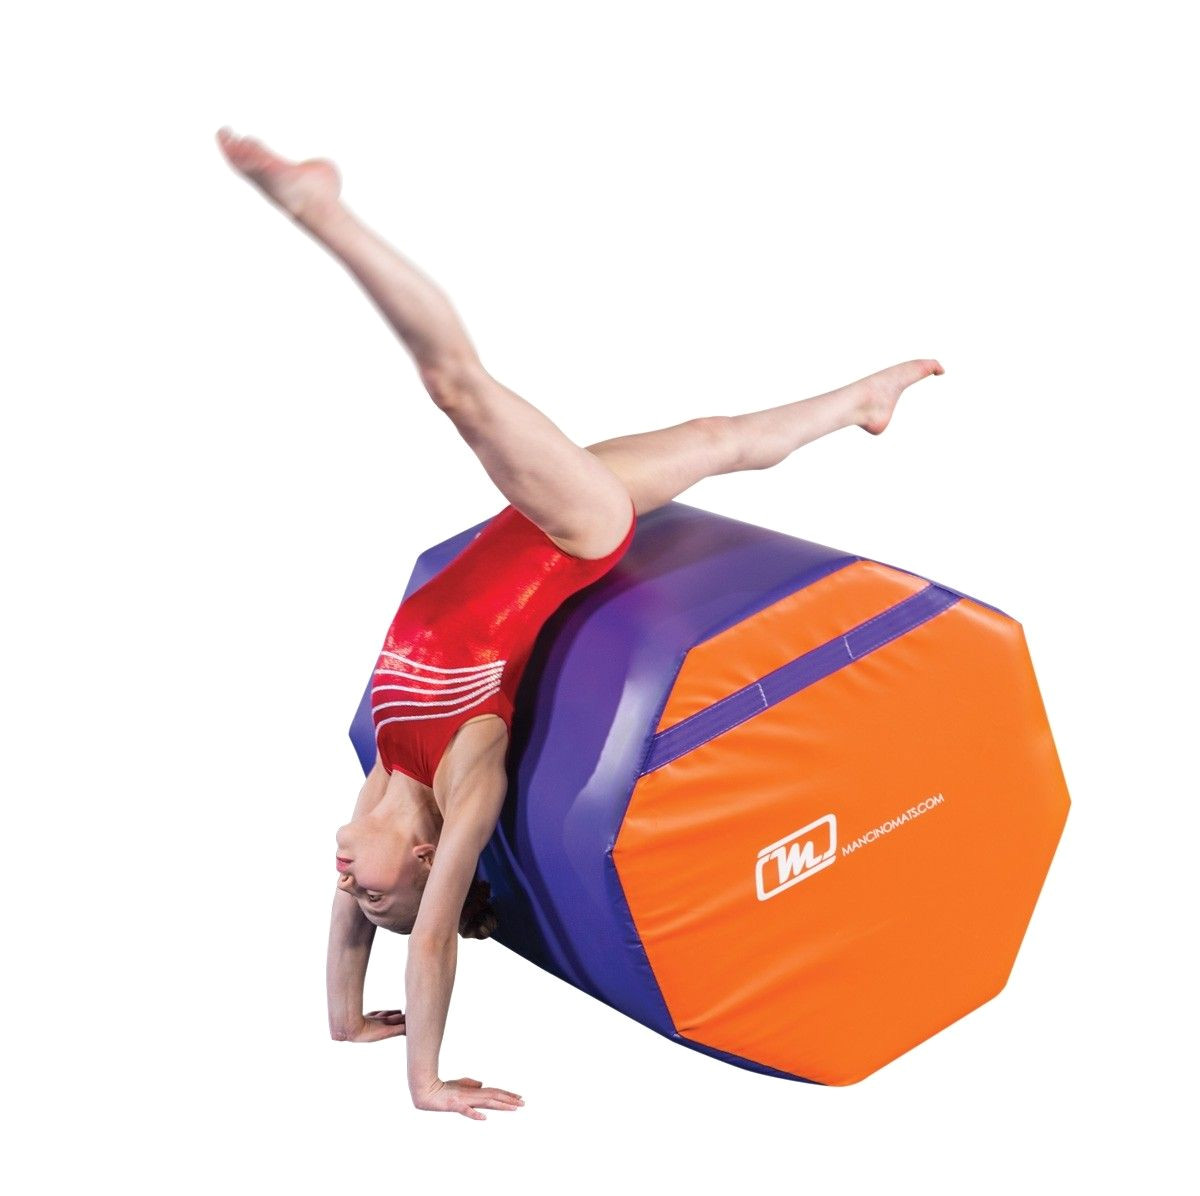 mancino s 30 x 36 purple and orange octagon mat is in stock and ready to ship perfect for any tumblers who need to practice at home to keep up and exceed